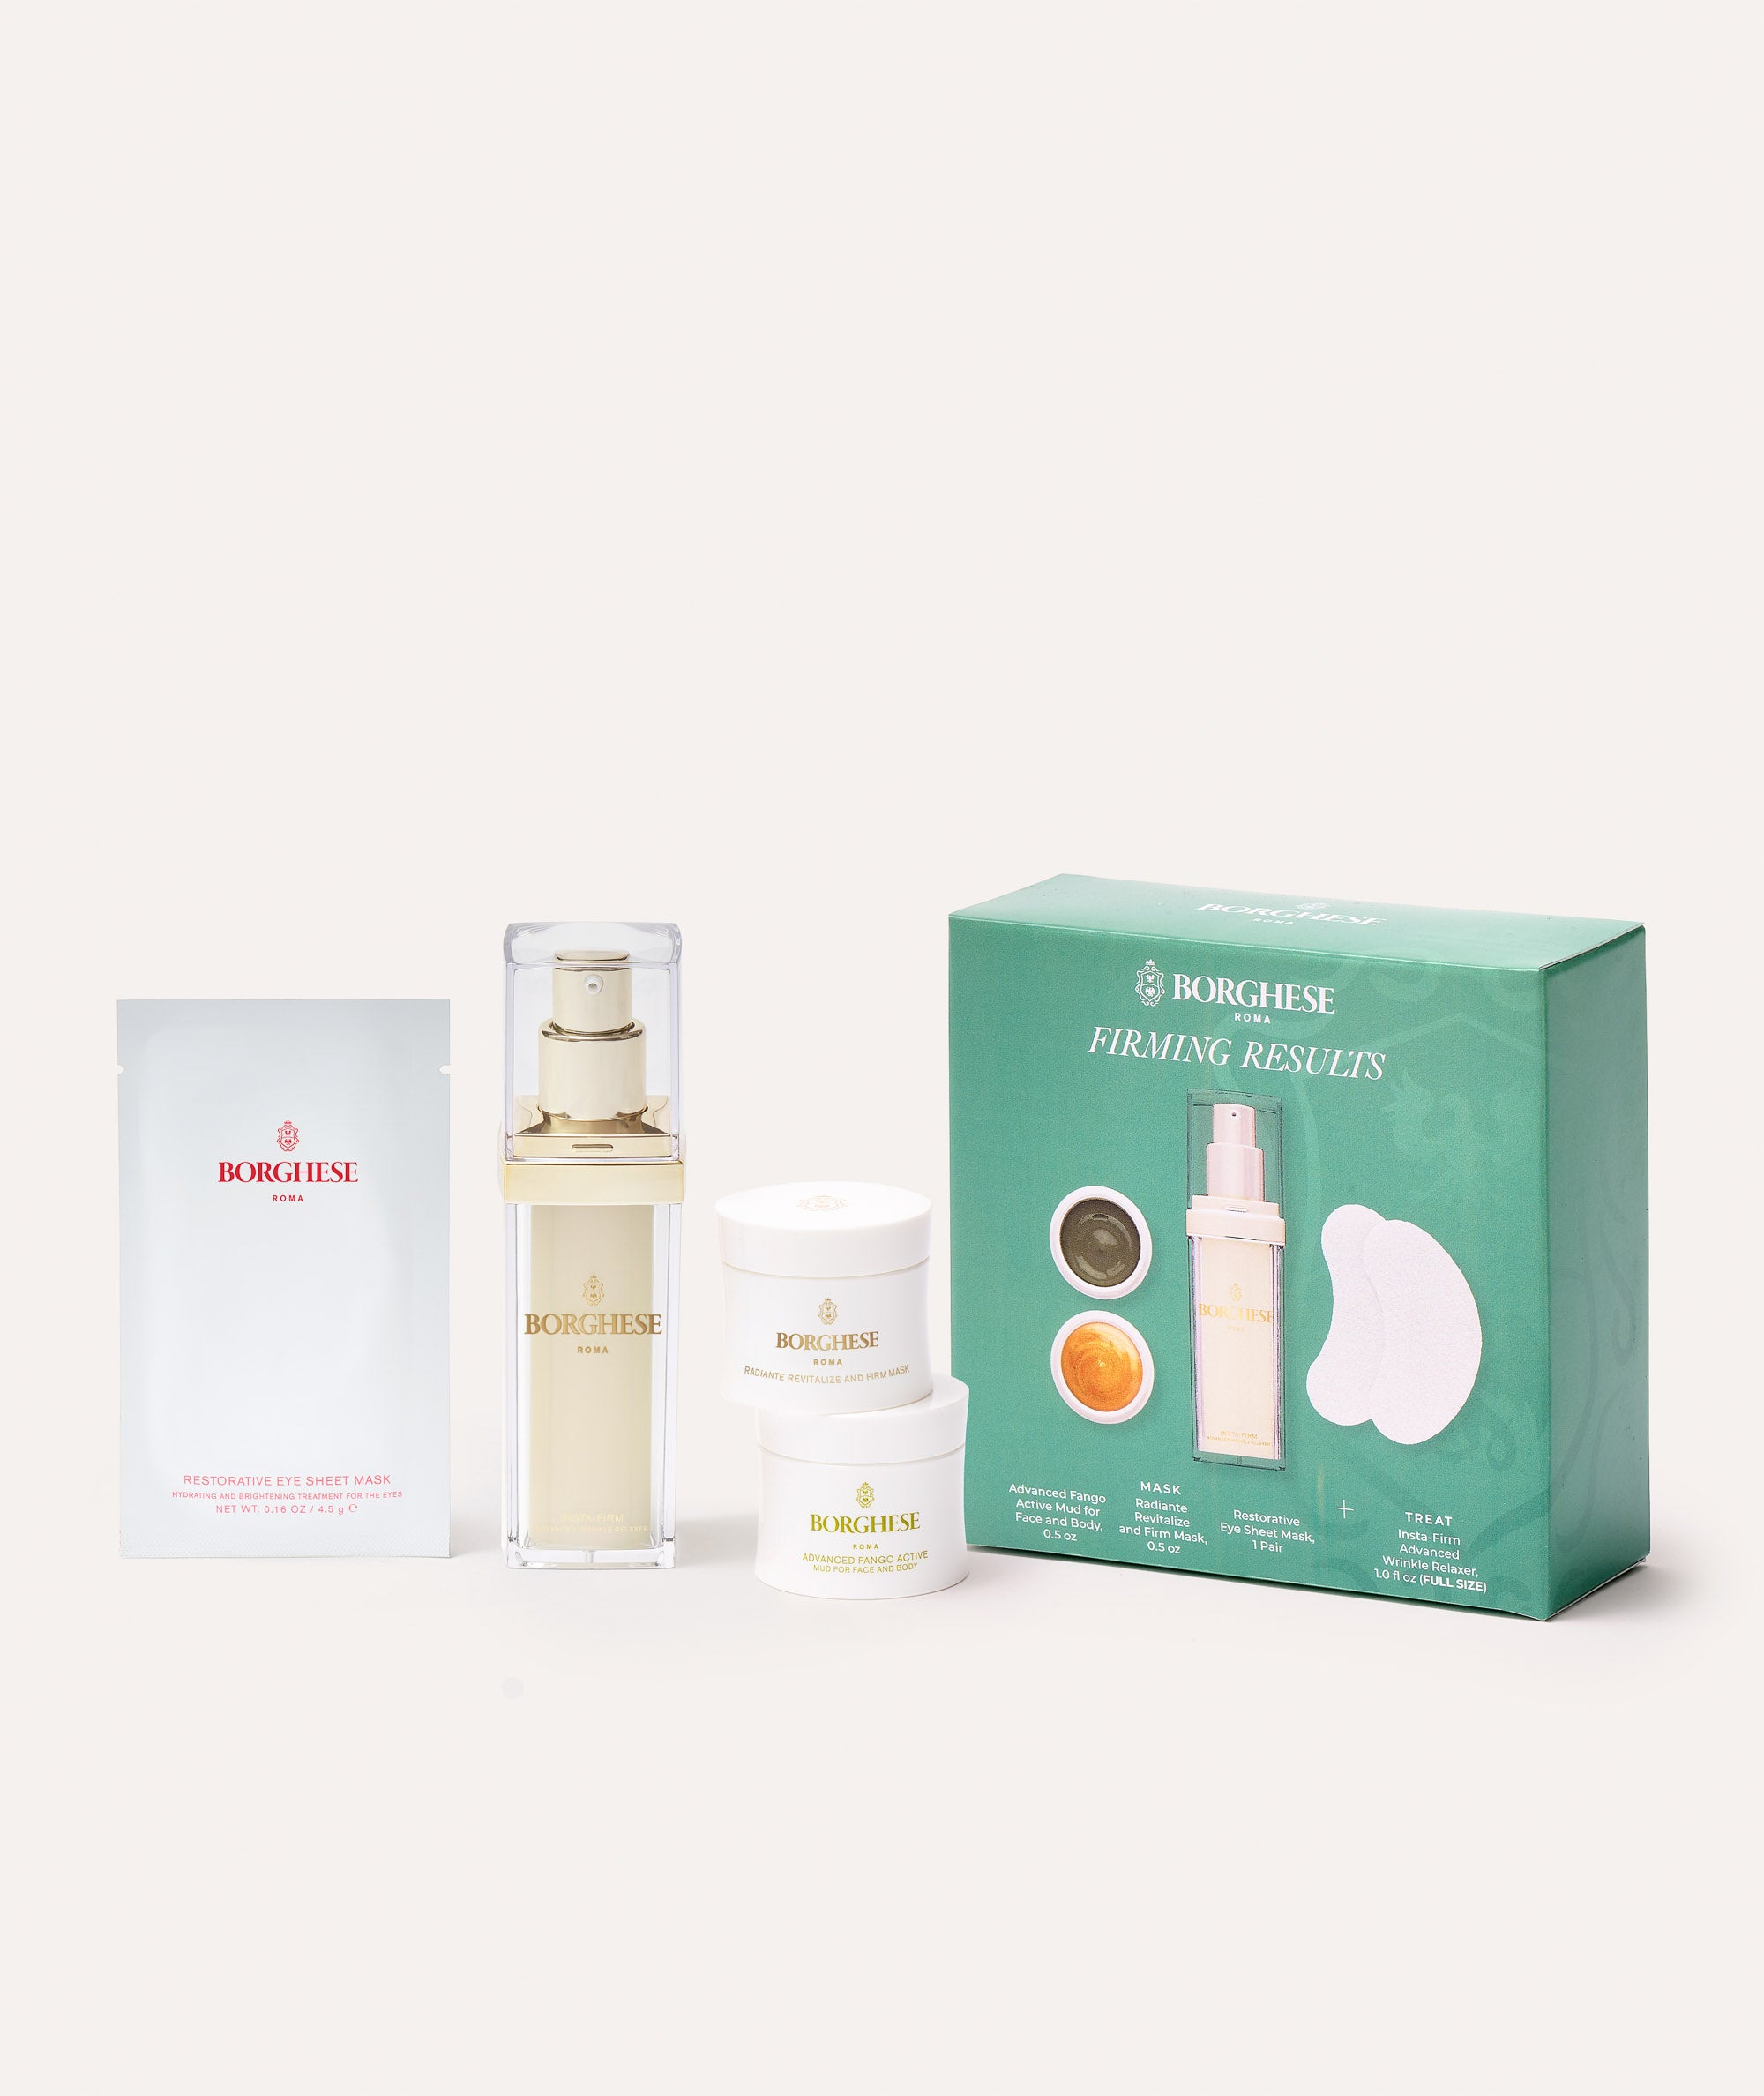 The Borghese 4-Piece Firming Results Gift Set contents and green gift box